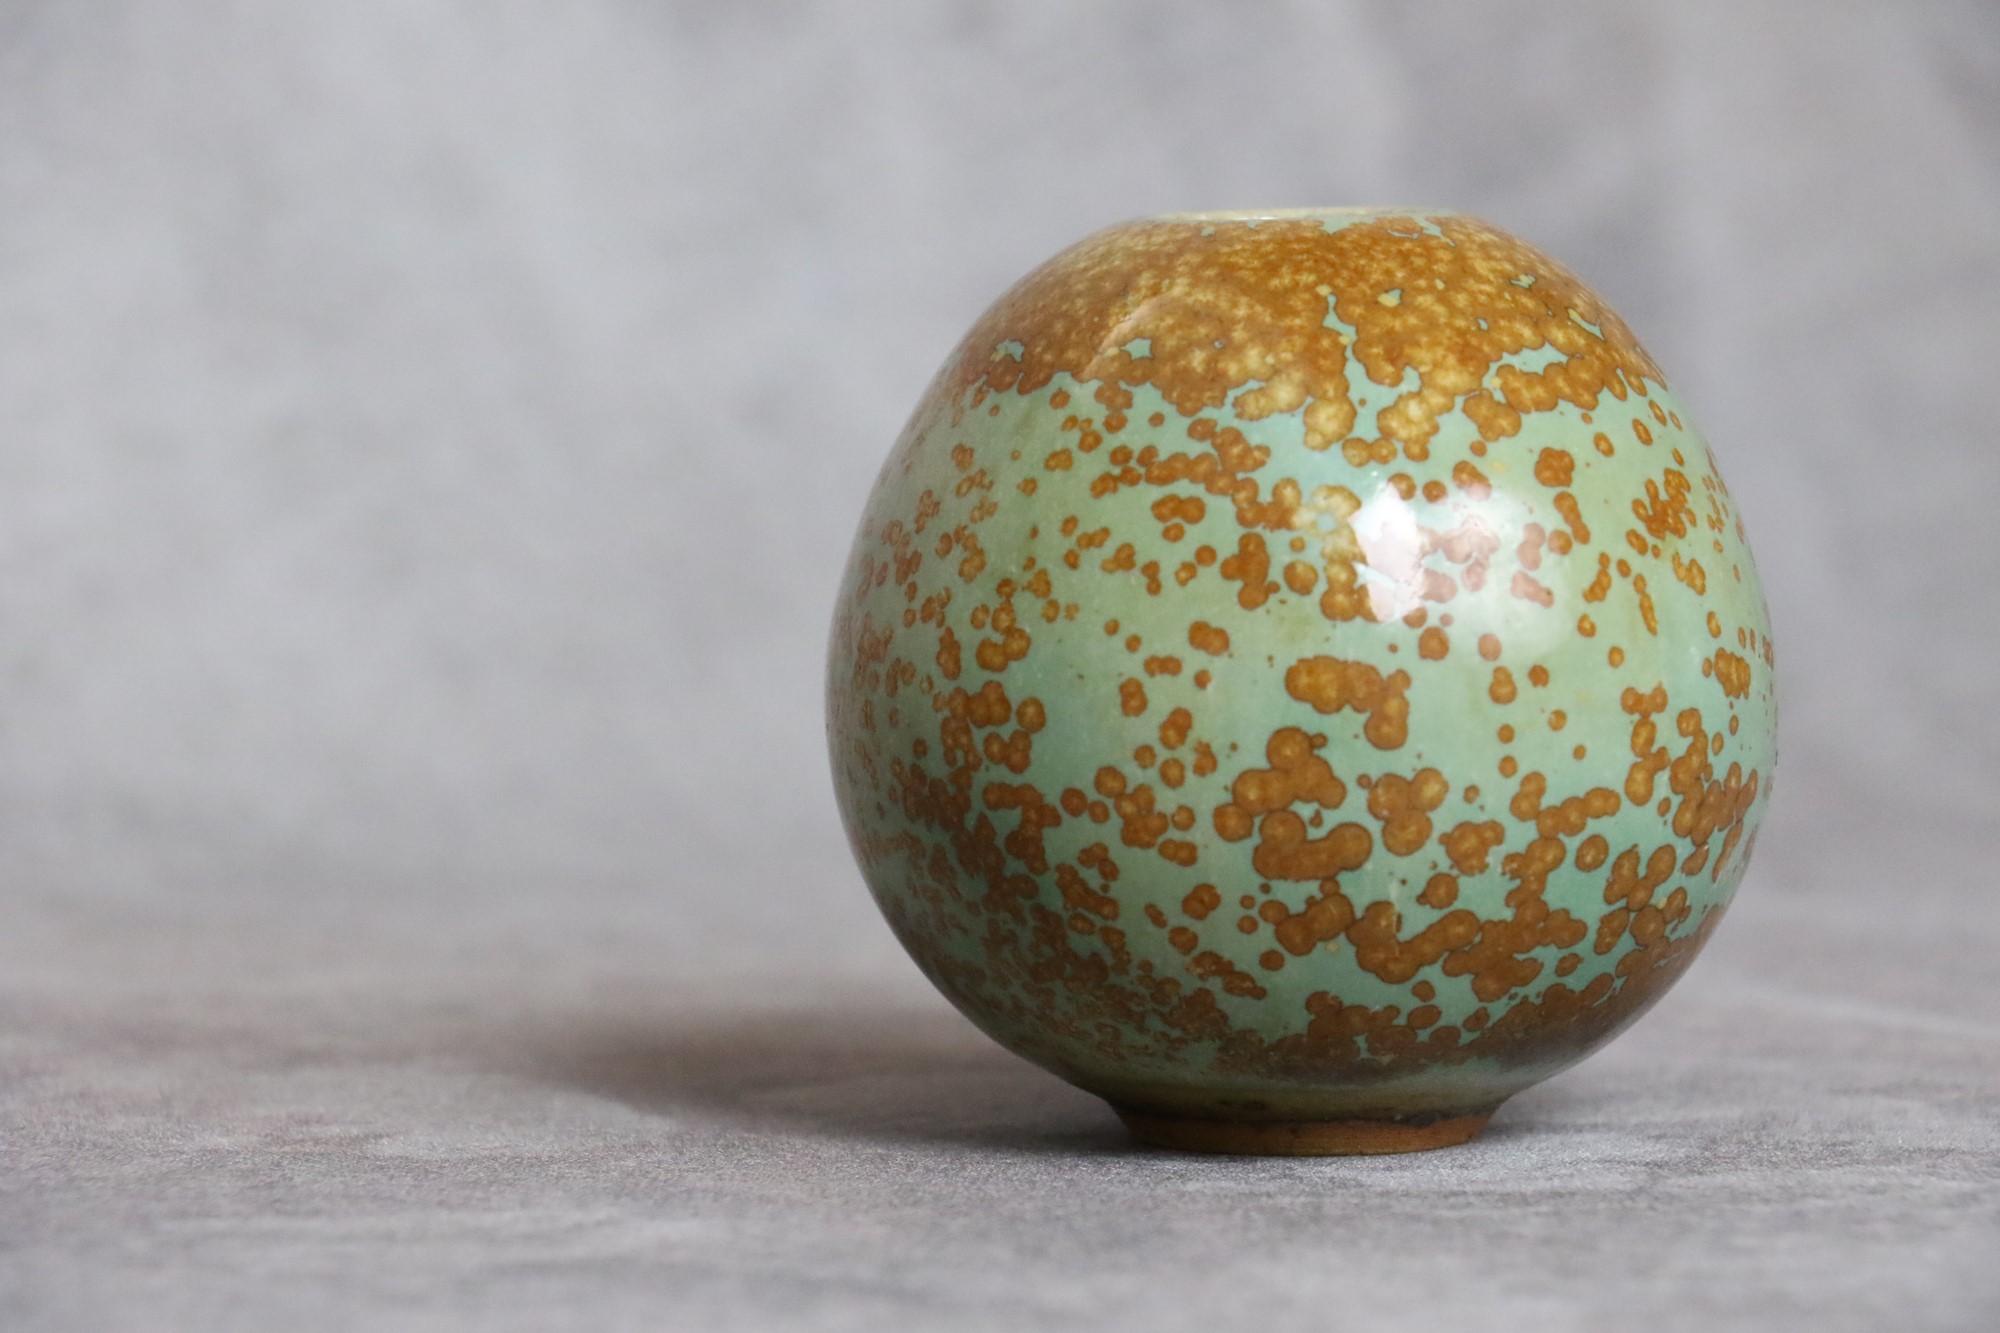 Contemporary French Ceramic Ball Vase with Nucleations by Monique Cavallini - circa 2000 For Sale